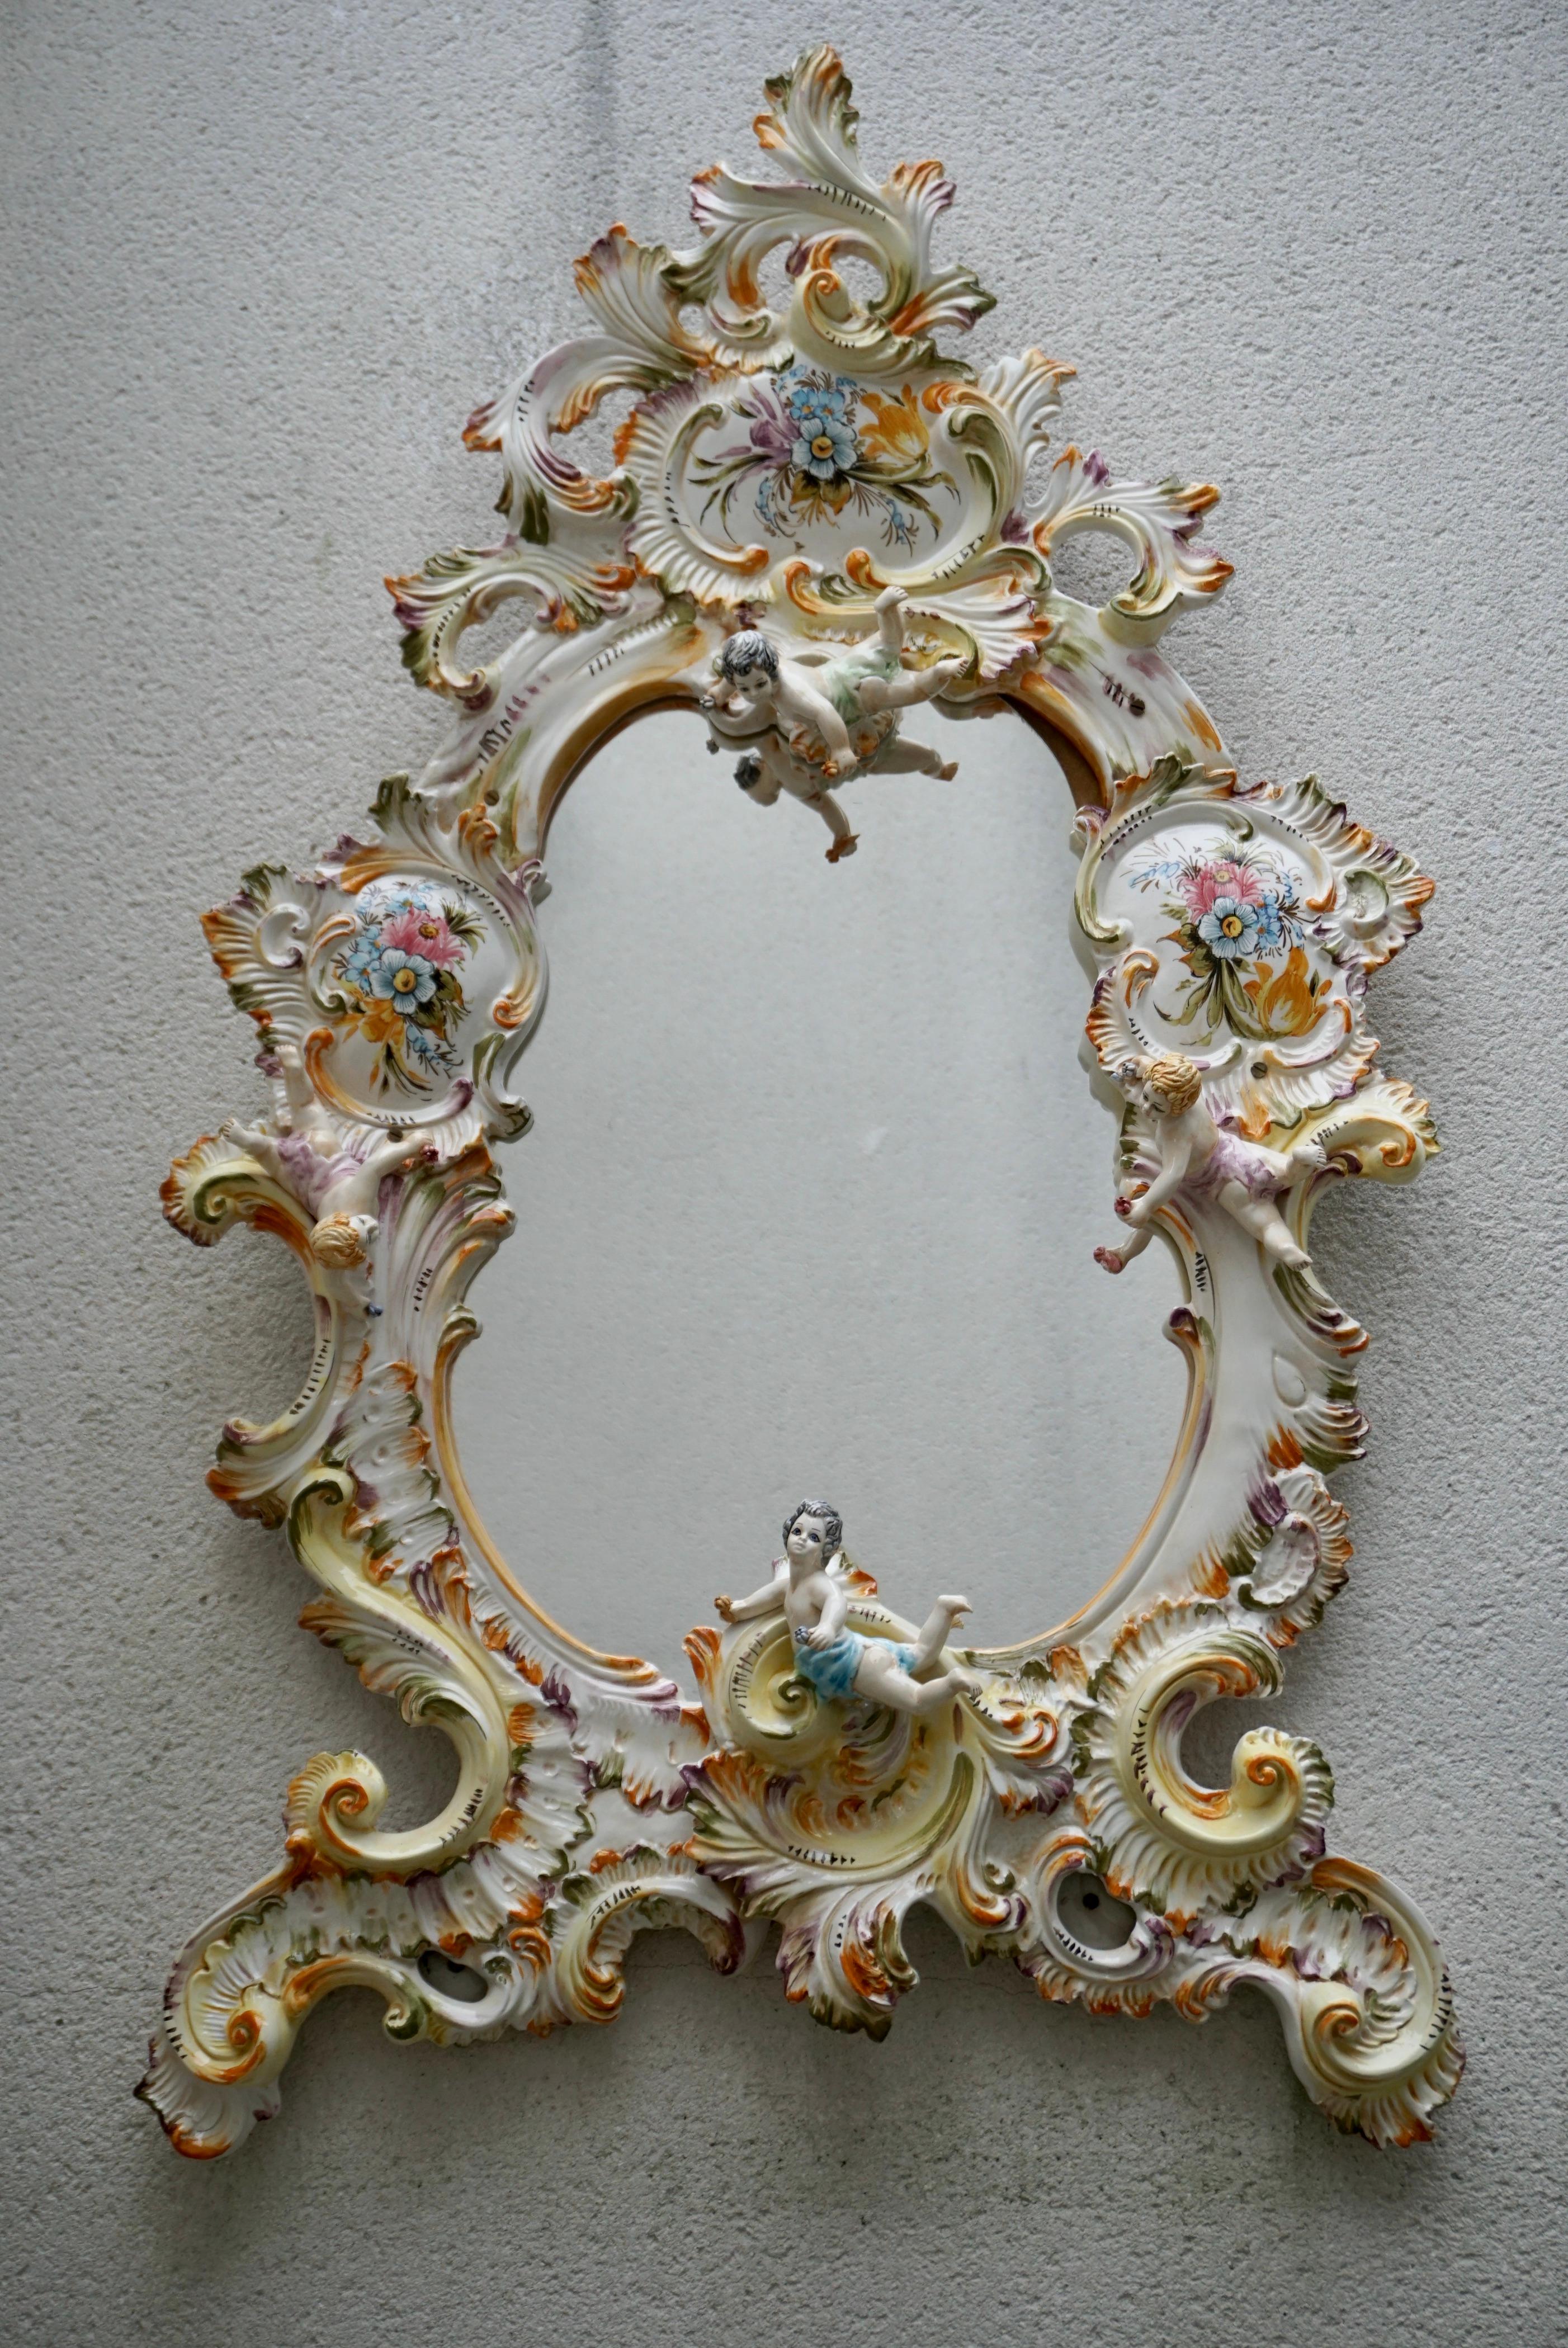 Hollywood Regency Mid-20th Century Italian Capodimonte Porcelain Mirror with Flowers and Cherubs For Sale